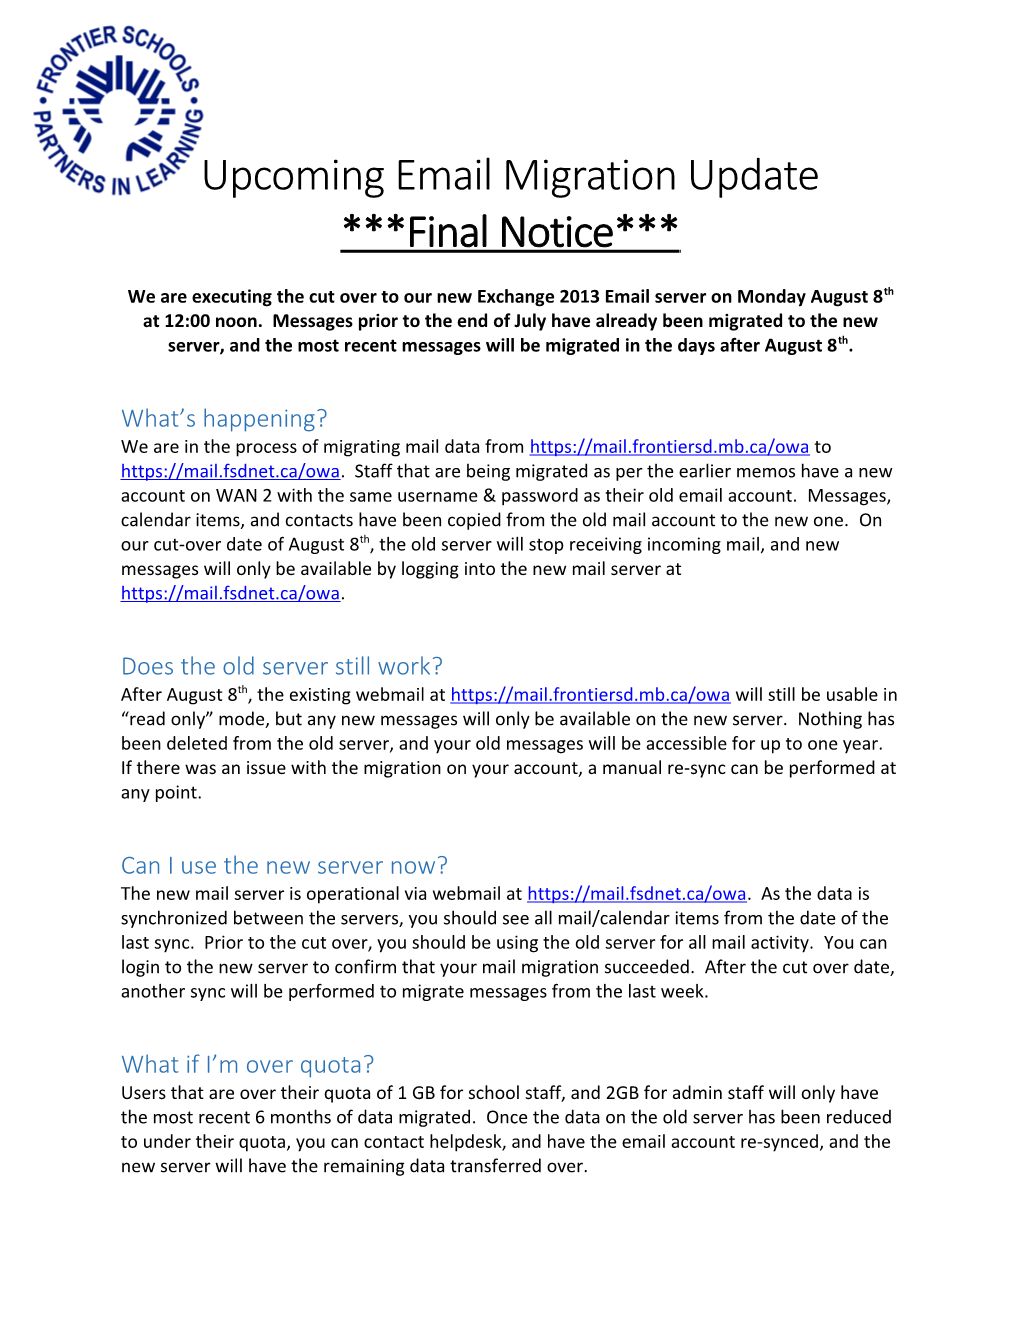 Email Migration Update